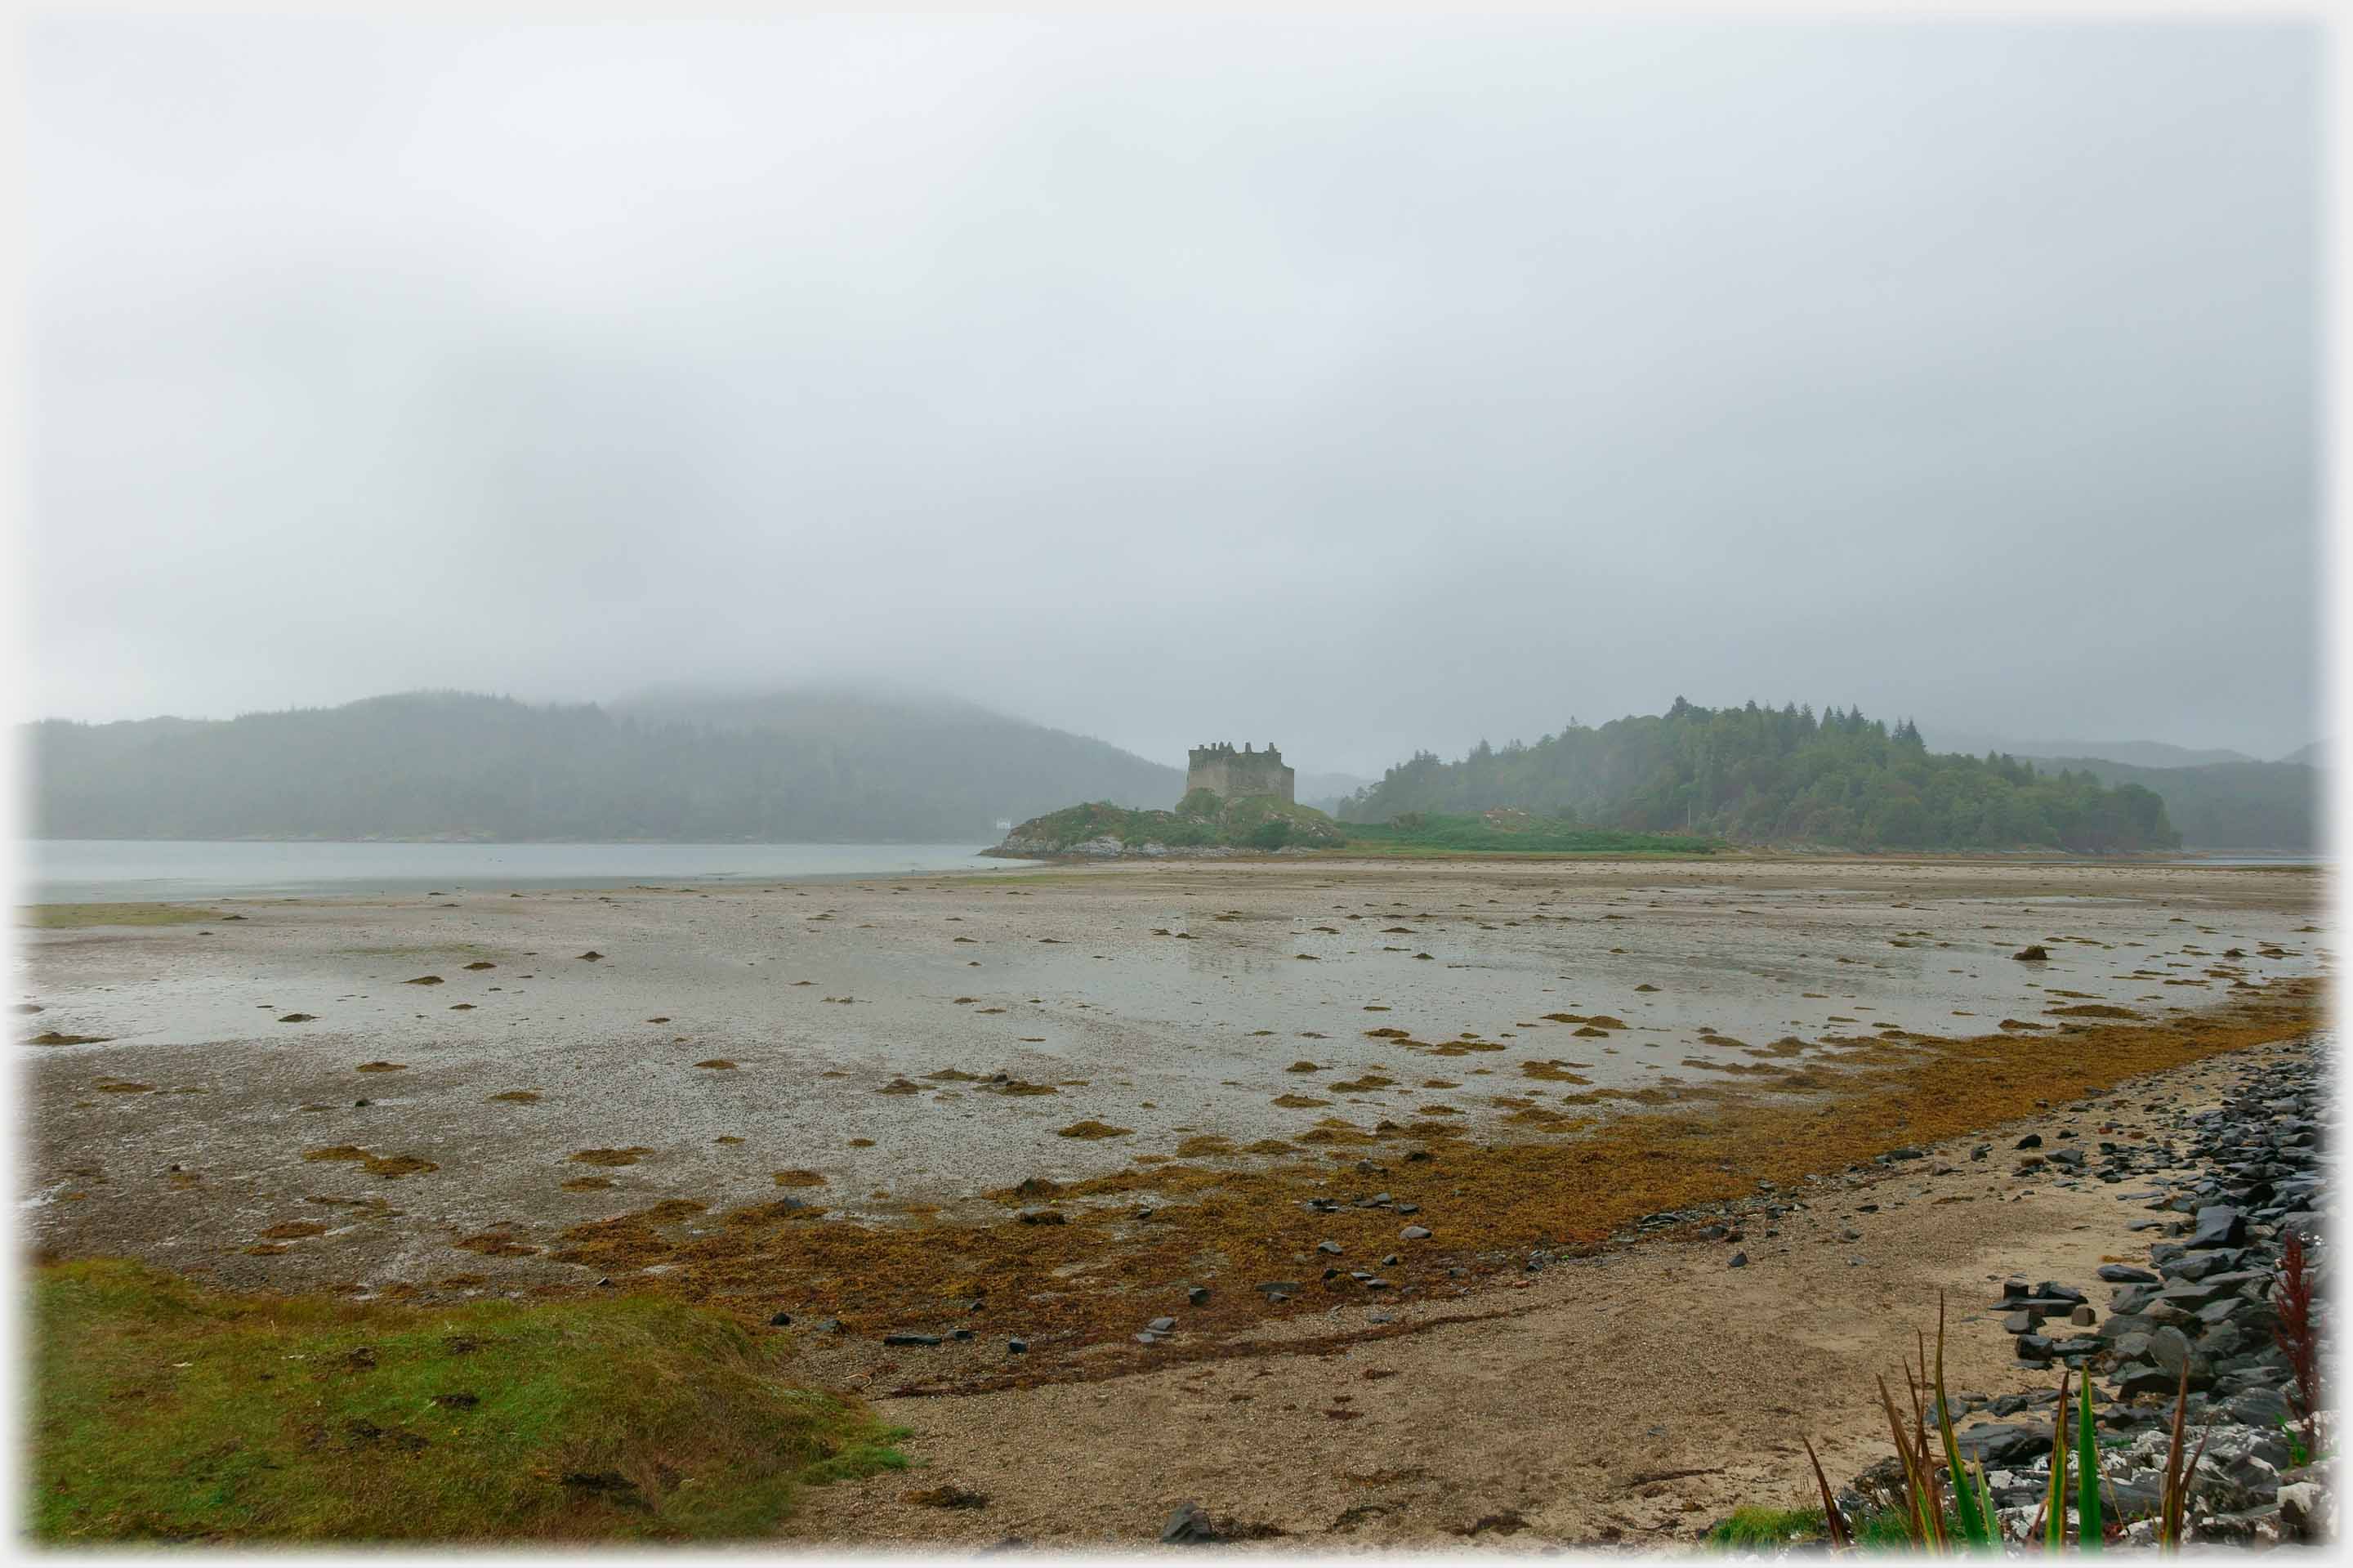 intertidal [sic - however, shouldn't it be intratidal] zone with tide out and castle sitting on islet, mist around.